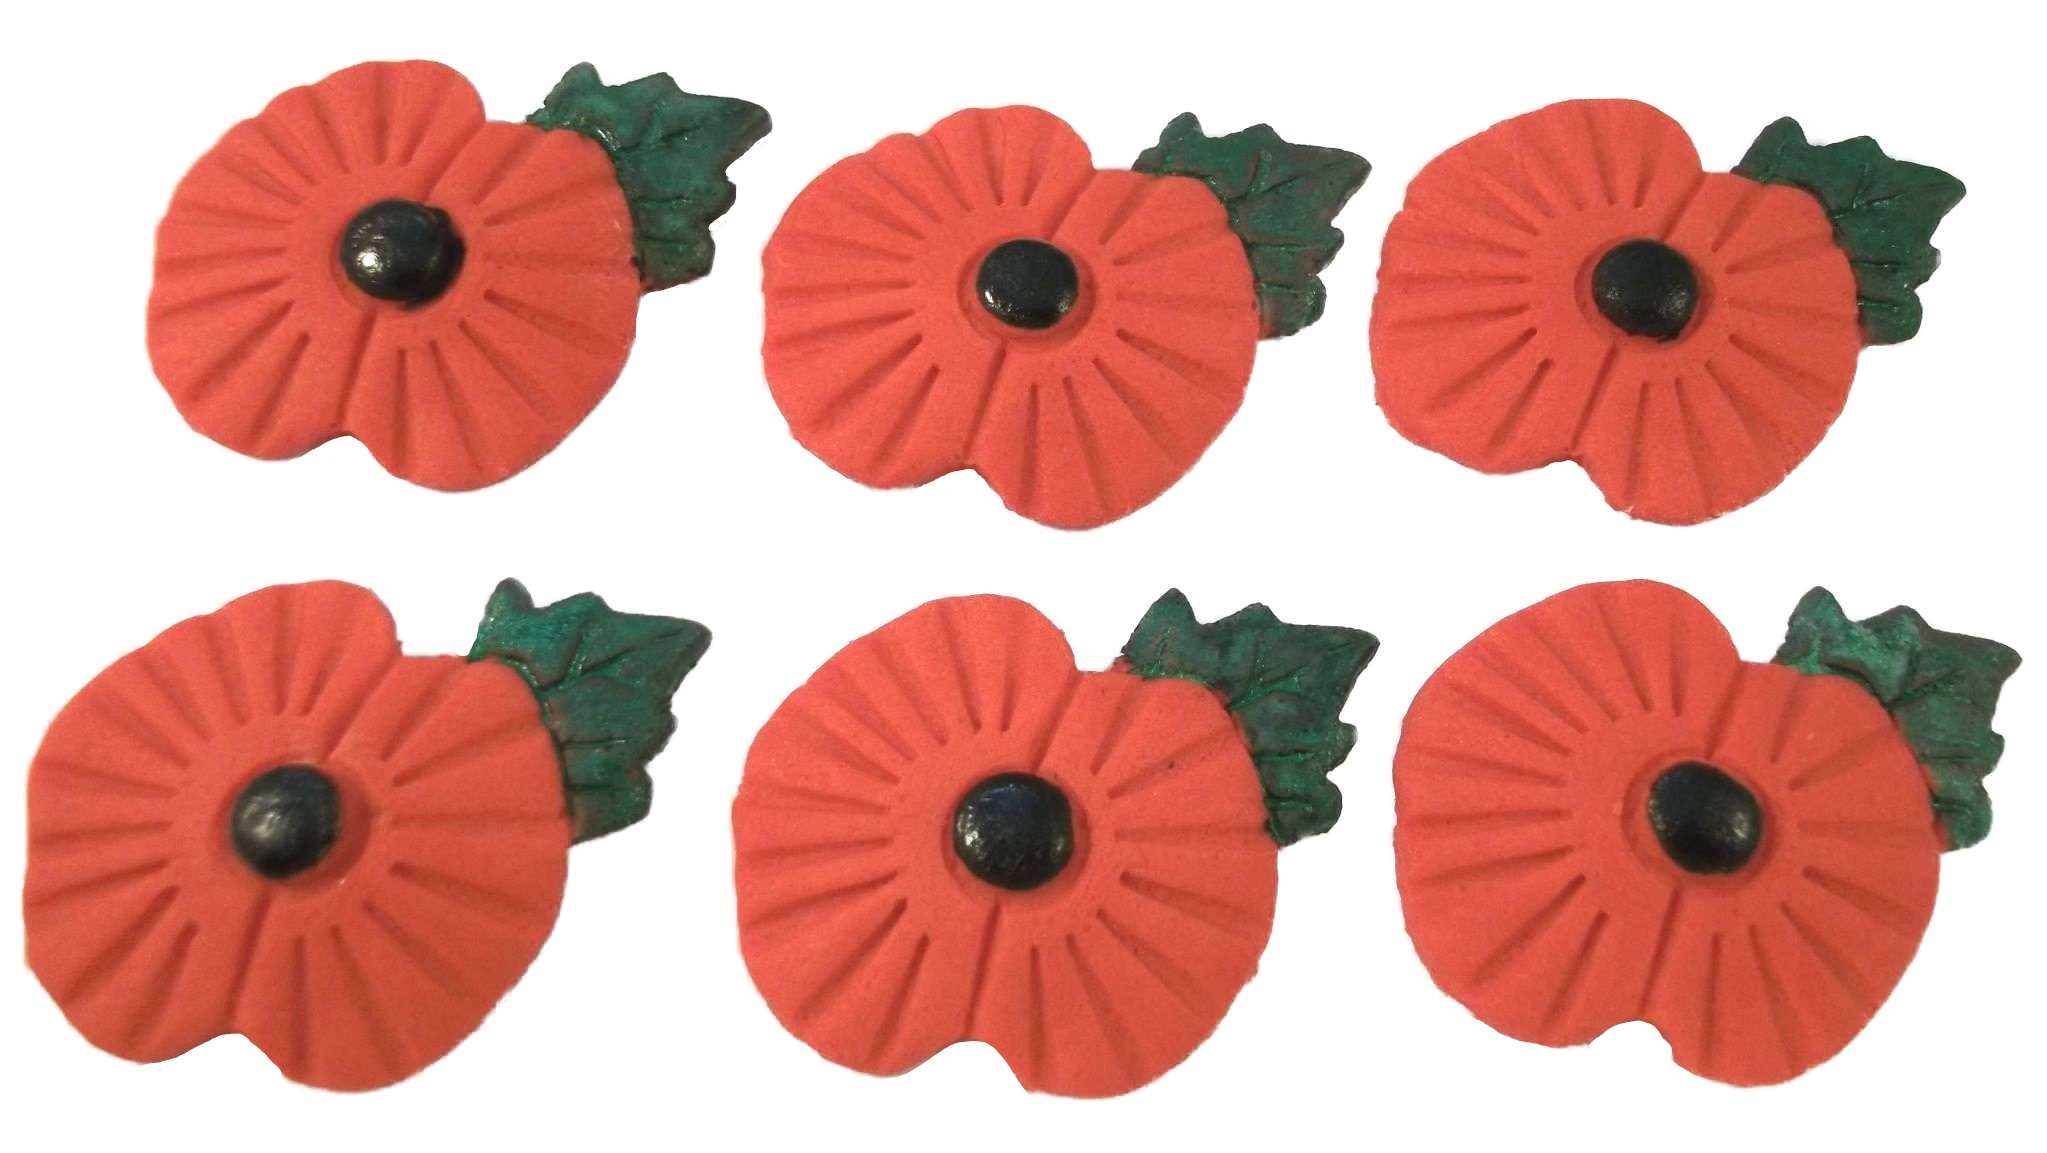 Inked620Poppiesjpeg LI These poppies are a great way to raise funds for the Royal British Legion. Add them to your bake sale and for every set sold we will donate 10% to the RBL as well. 6 Poppies Approx Size 3.8 cm by 3 cm